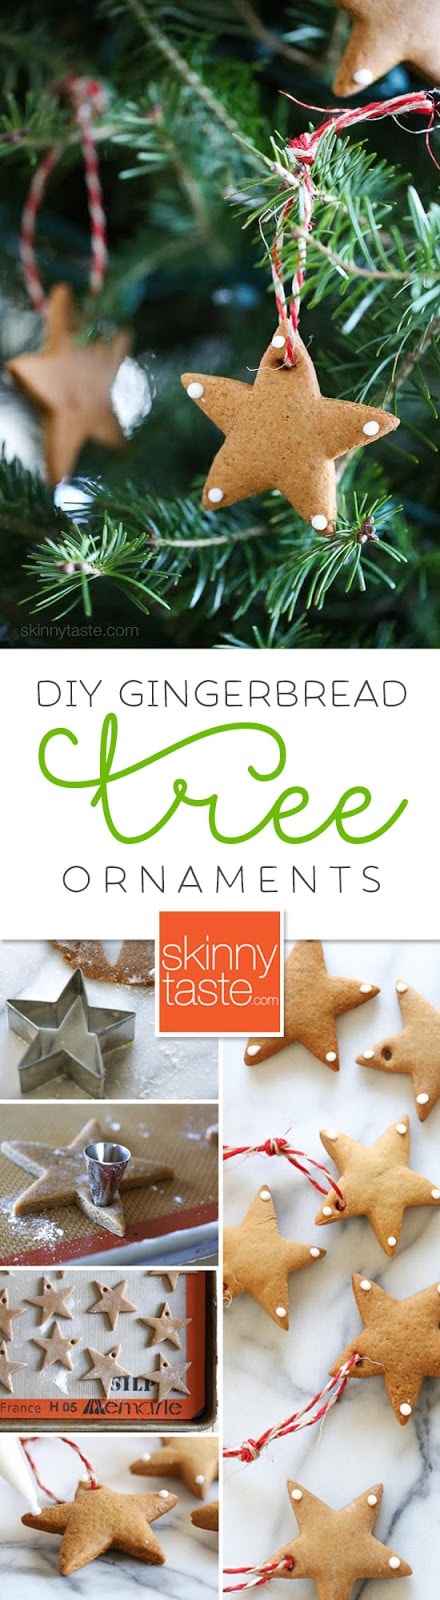 DIY Gingerbread Tree Ornaments – make Christmas ornaments out of gingerbread cookies. A fun project to do with the kids!